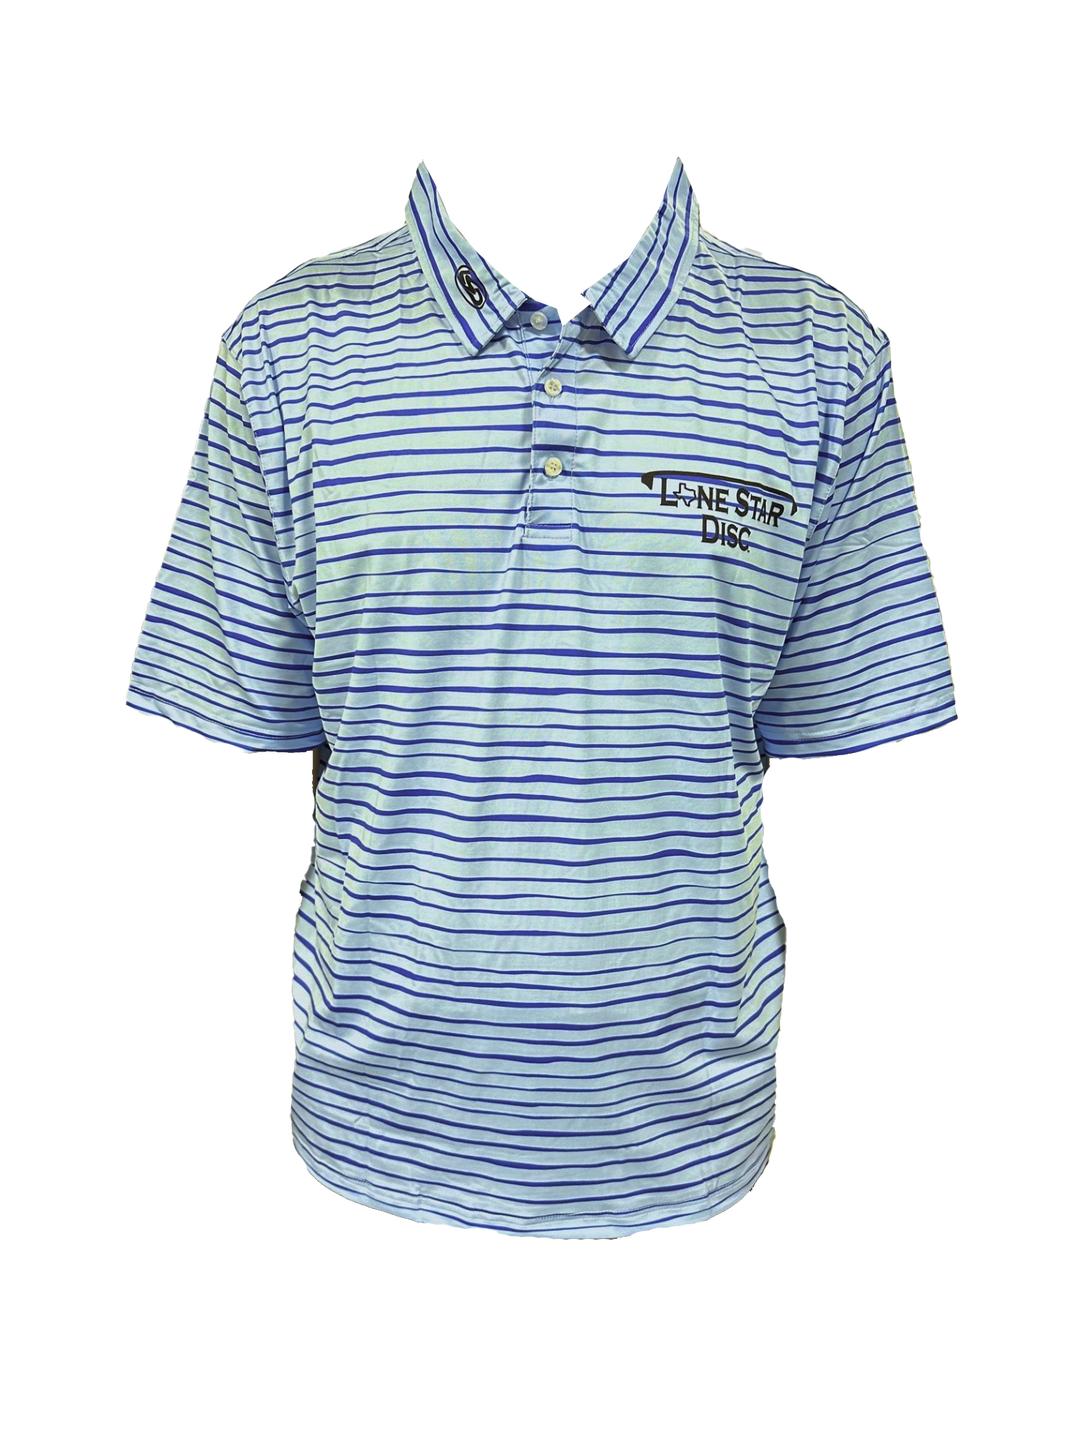 Lone Star Disc Blue Striped Athletic Polo